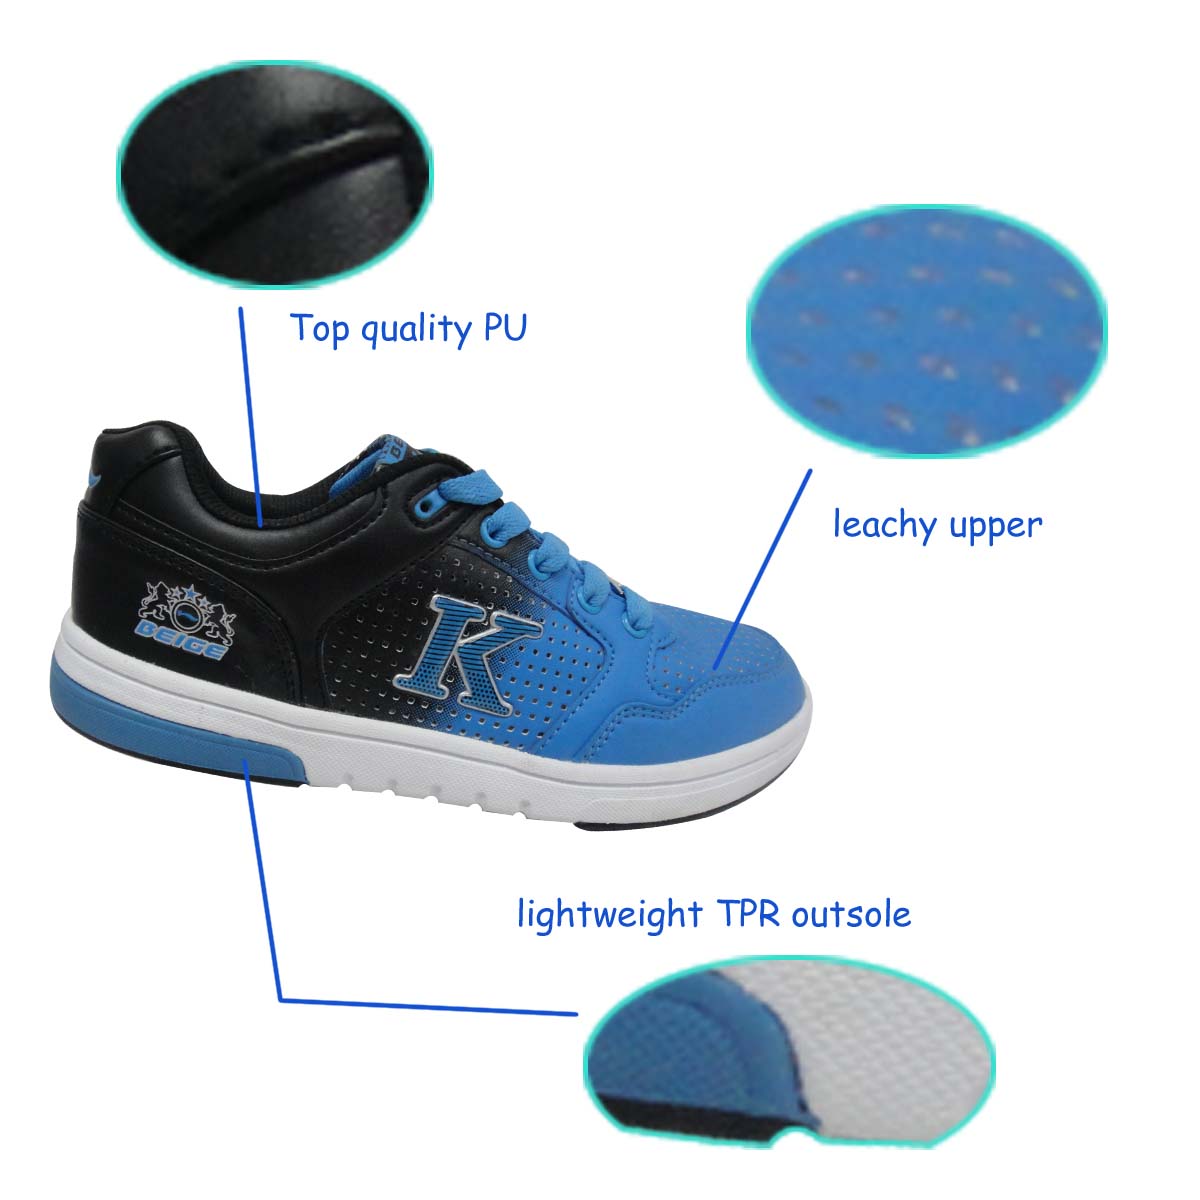 Season skate shoes from China for running with OEM &amp;ODM service to exported